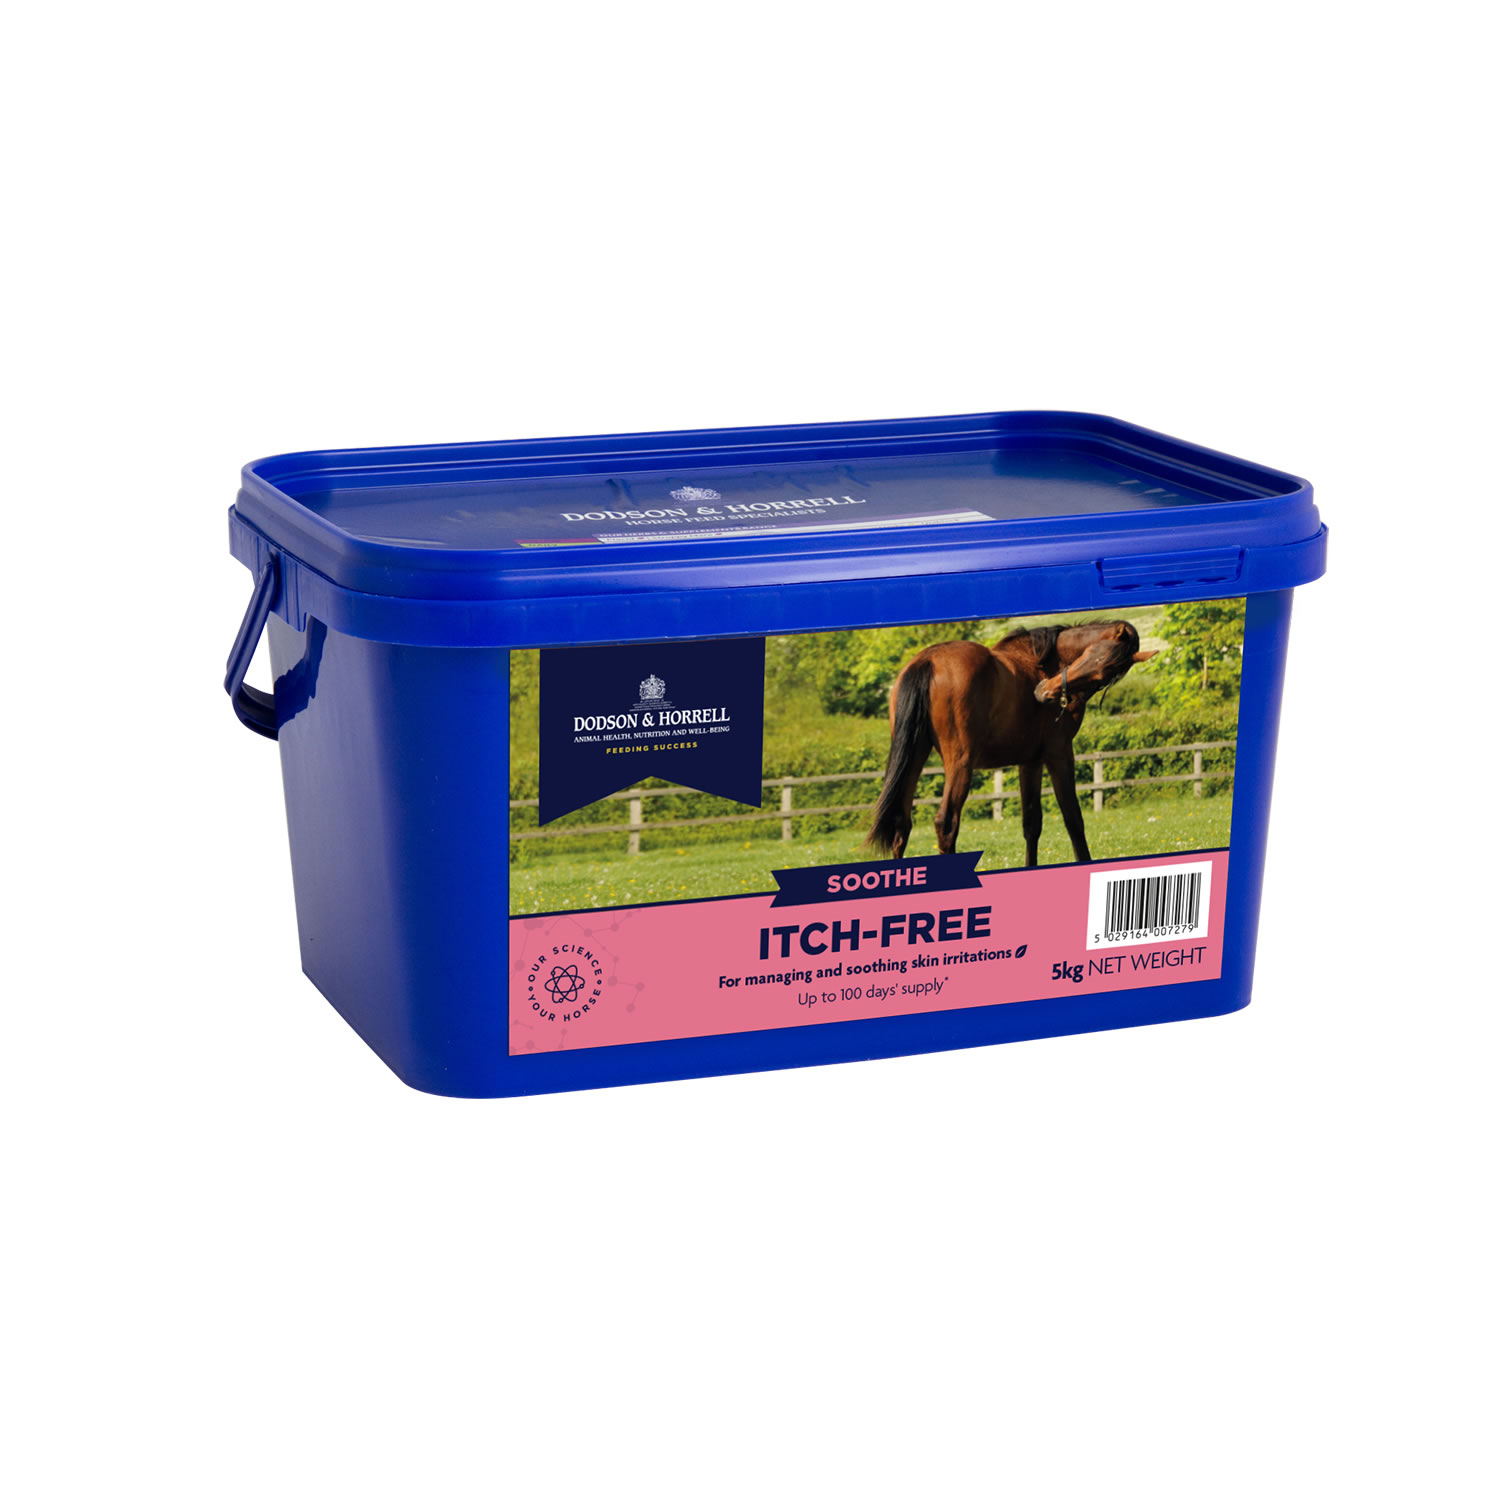 DODSON & HORRELL ITCH-FREE 5 KG 5 KG